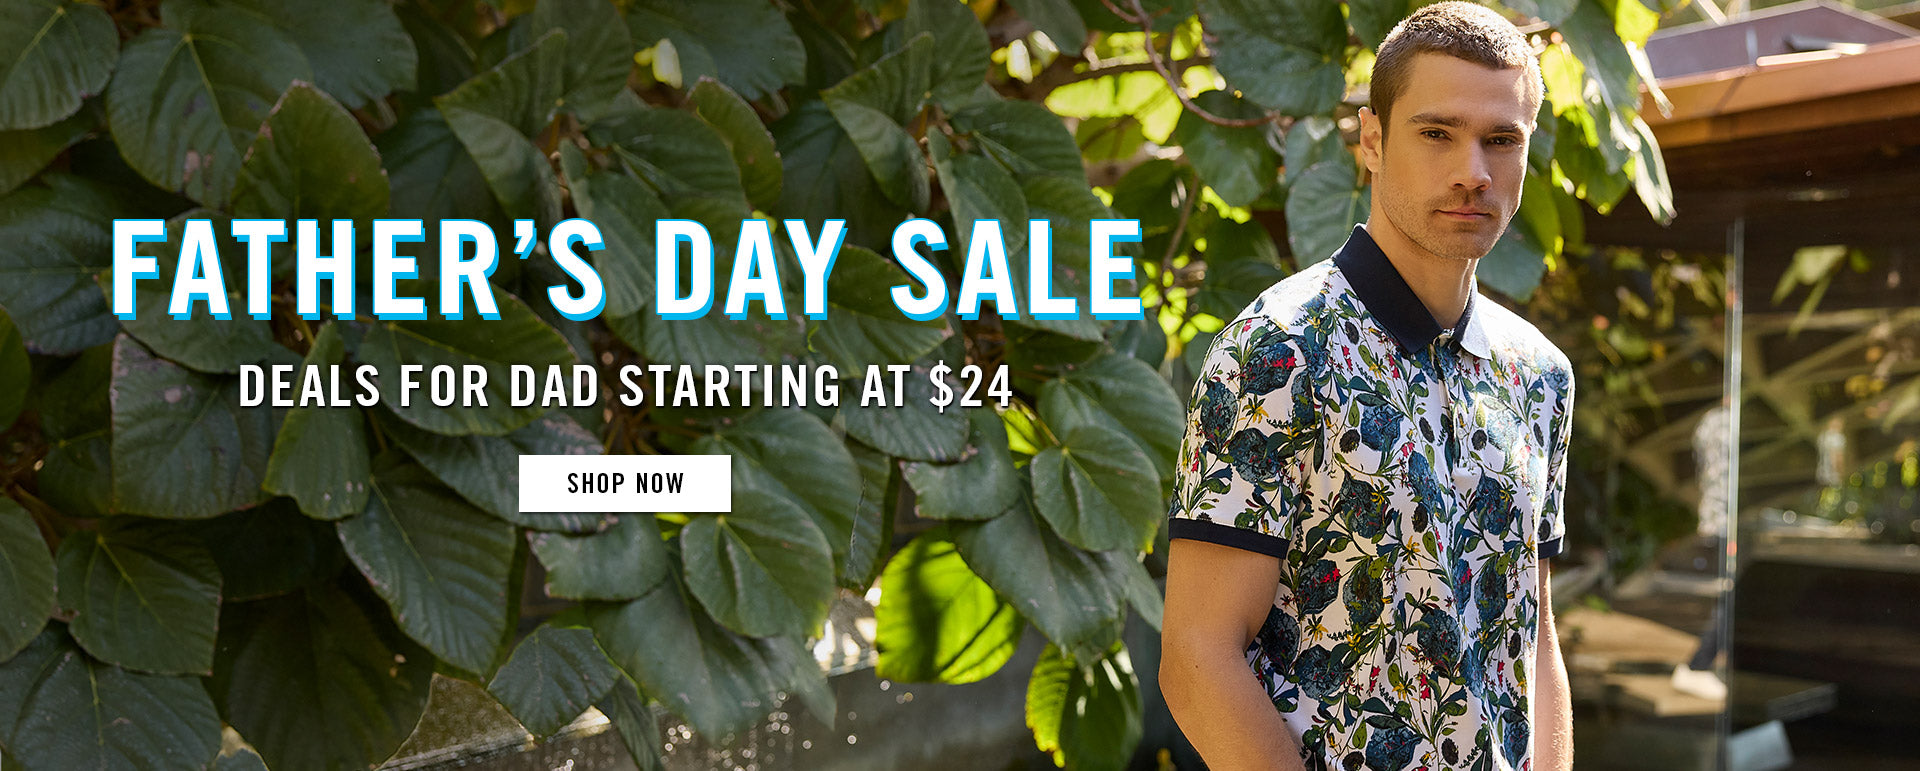 fathers day sale - DEALS FOR DAD STARTING AT $24| SHOP NOW